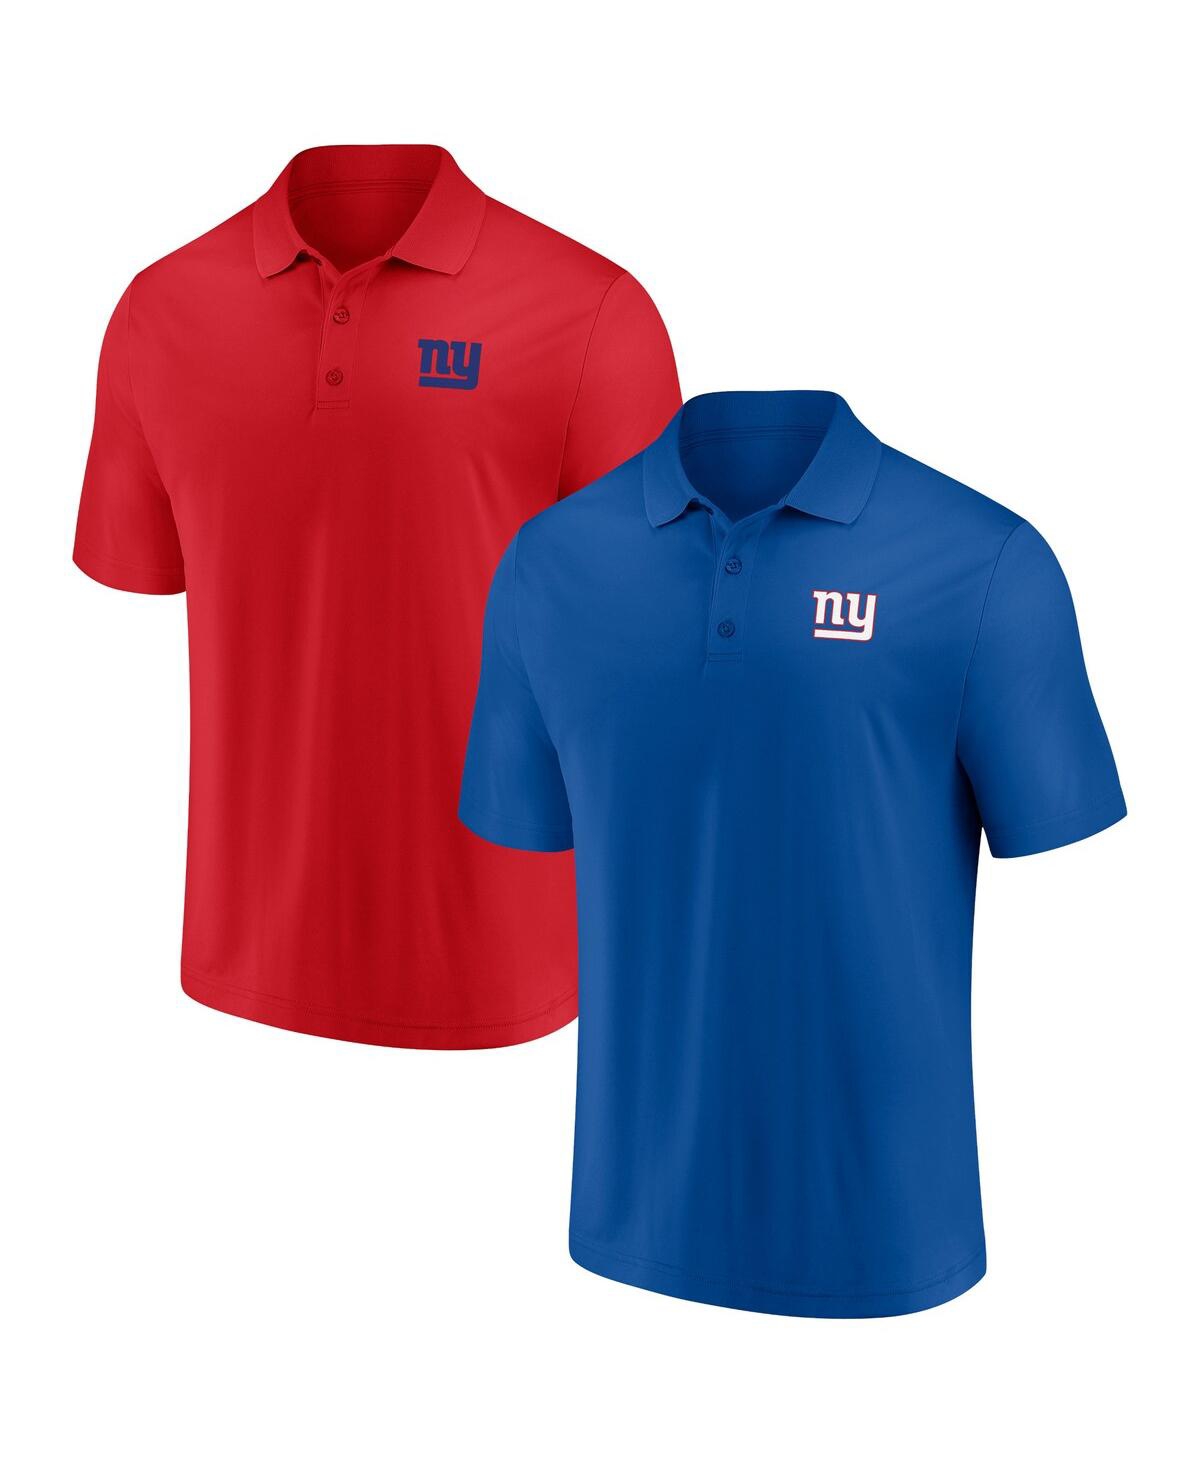 FANATICS MEN'S FANATICS ROYAL AND RED NEW YORK GIANTS HOME AND AWAY 2-PACK POLO SHIRT SET